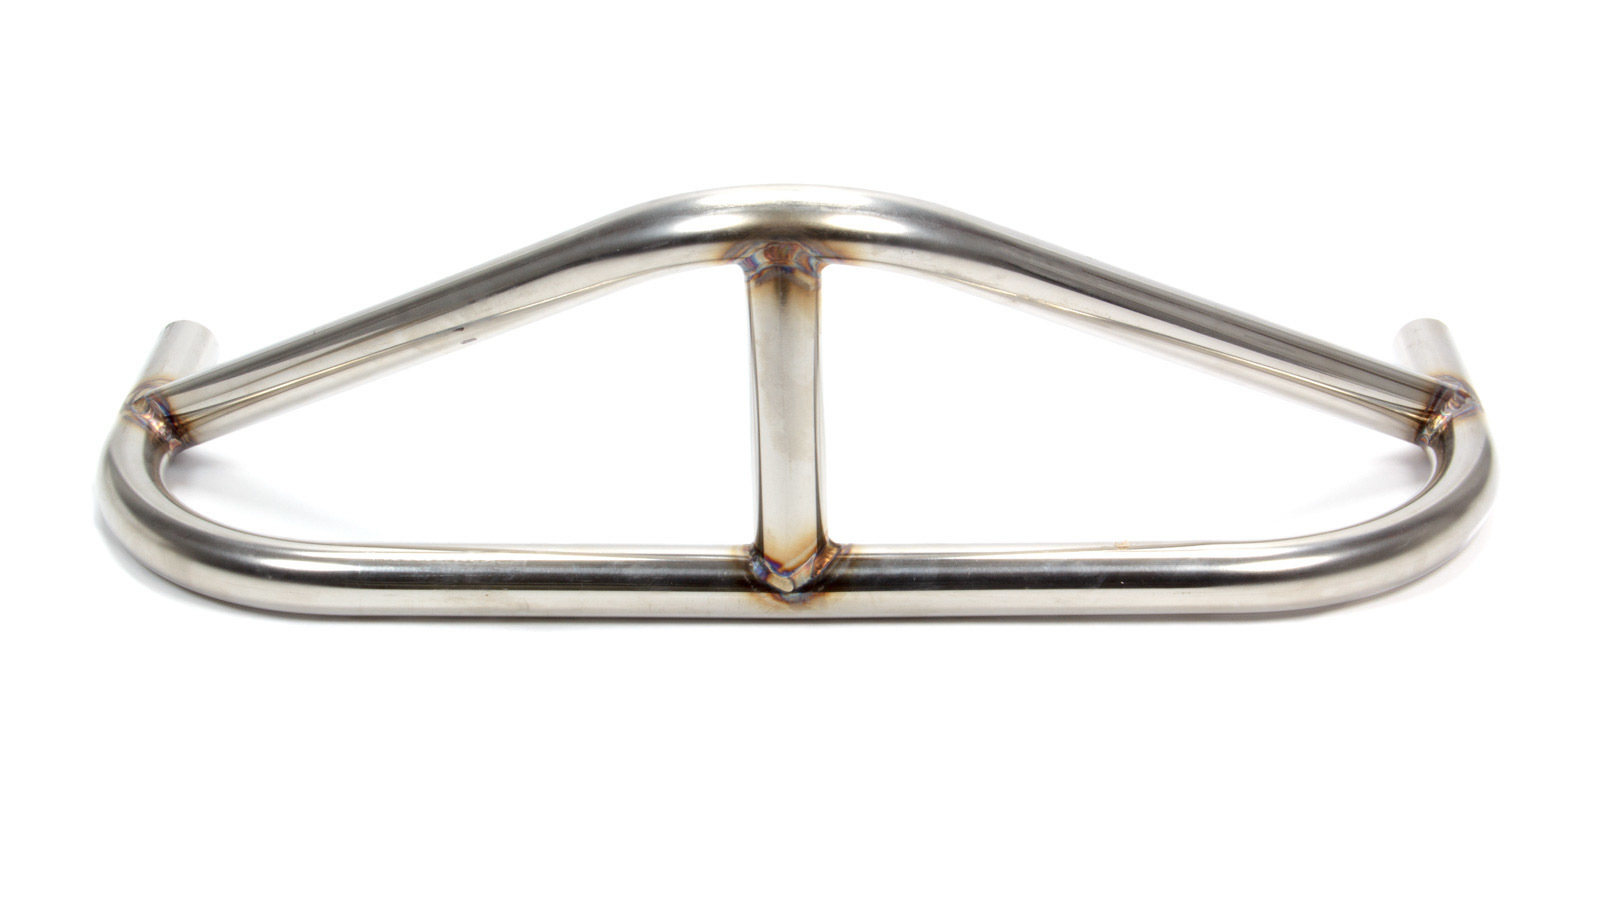 Hepfner Racing Products 8076-B Bumper, Stacked, Front, 1 in OD, Stainless, Natural, Sprint Car, Each